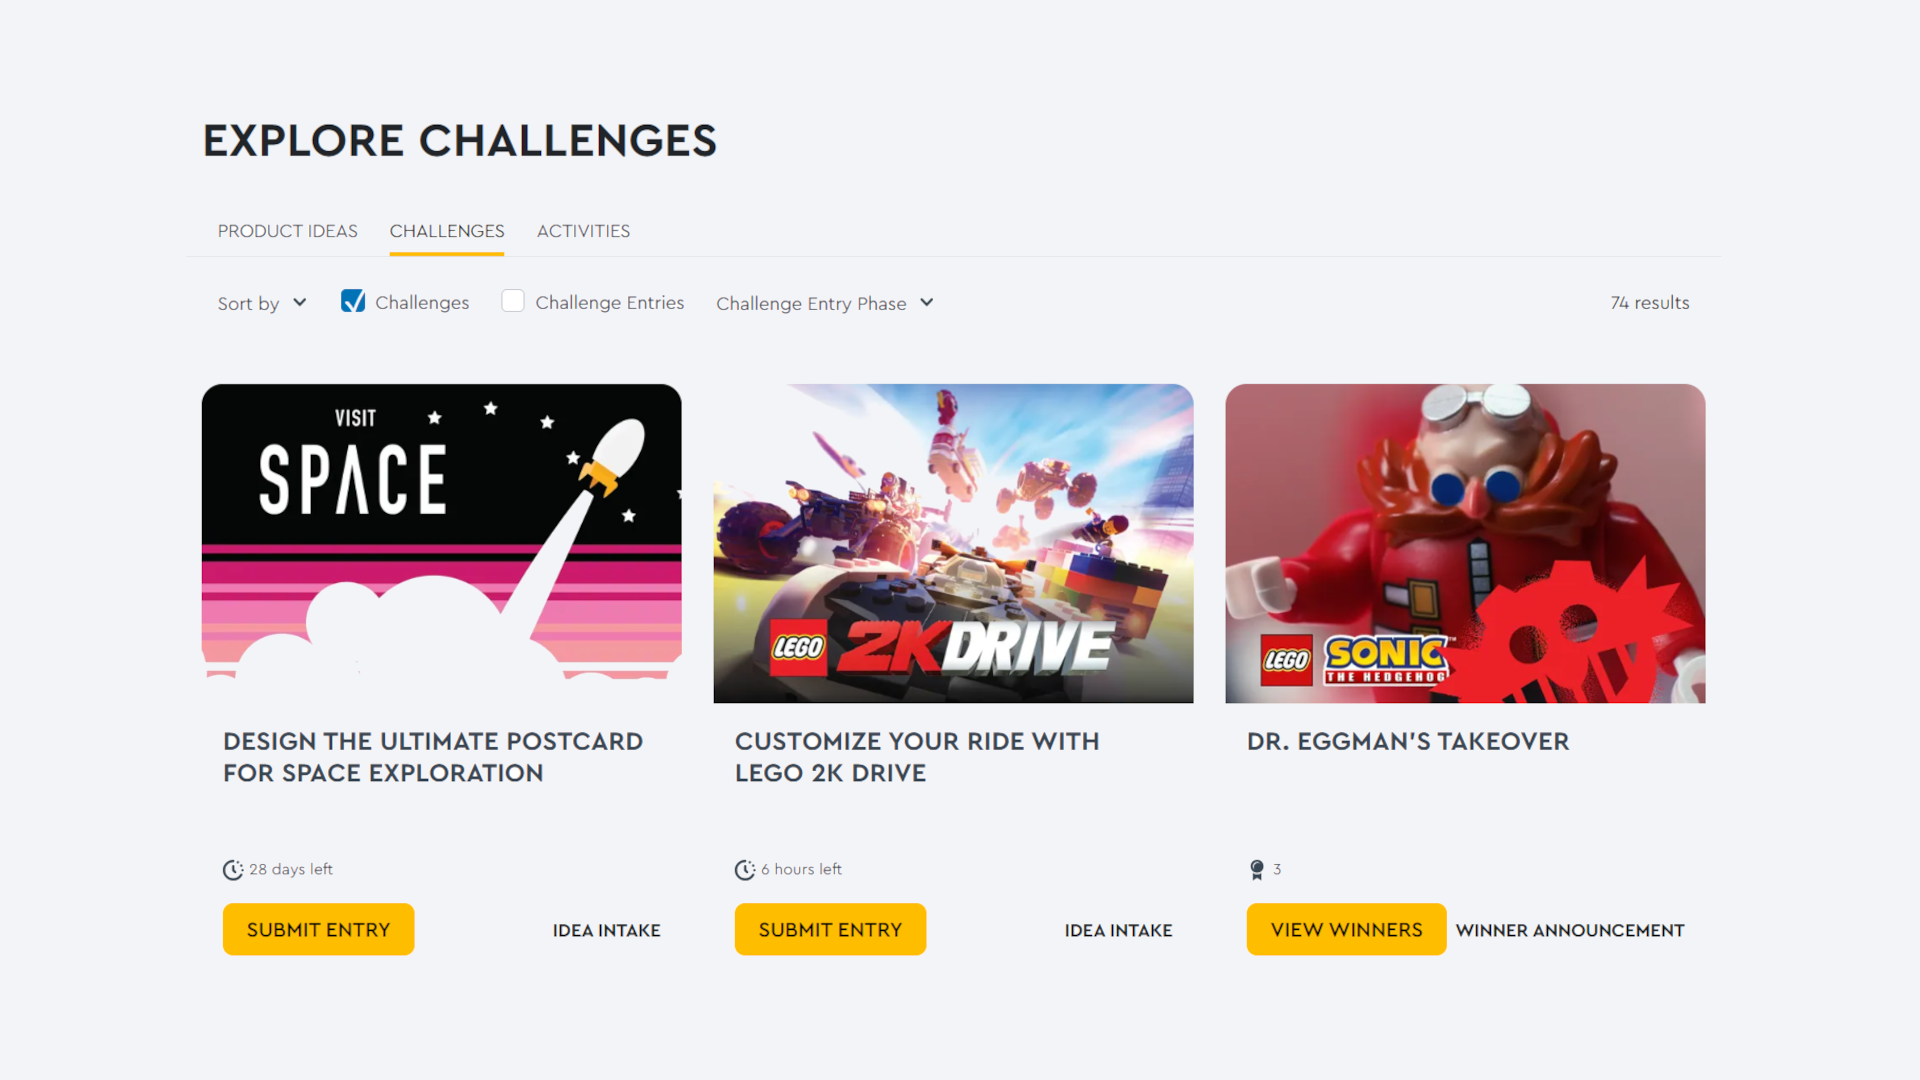 A screenshot shows the summaries of three LEGO Ideas Challenges.